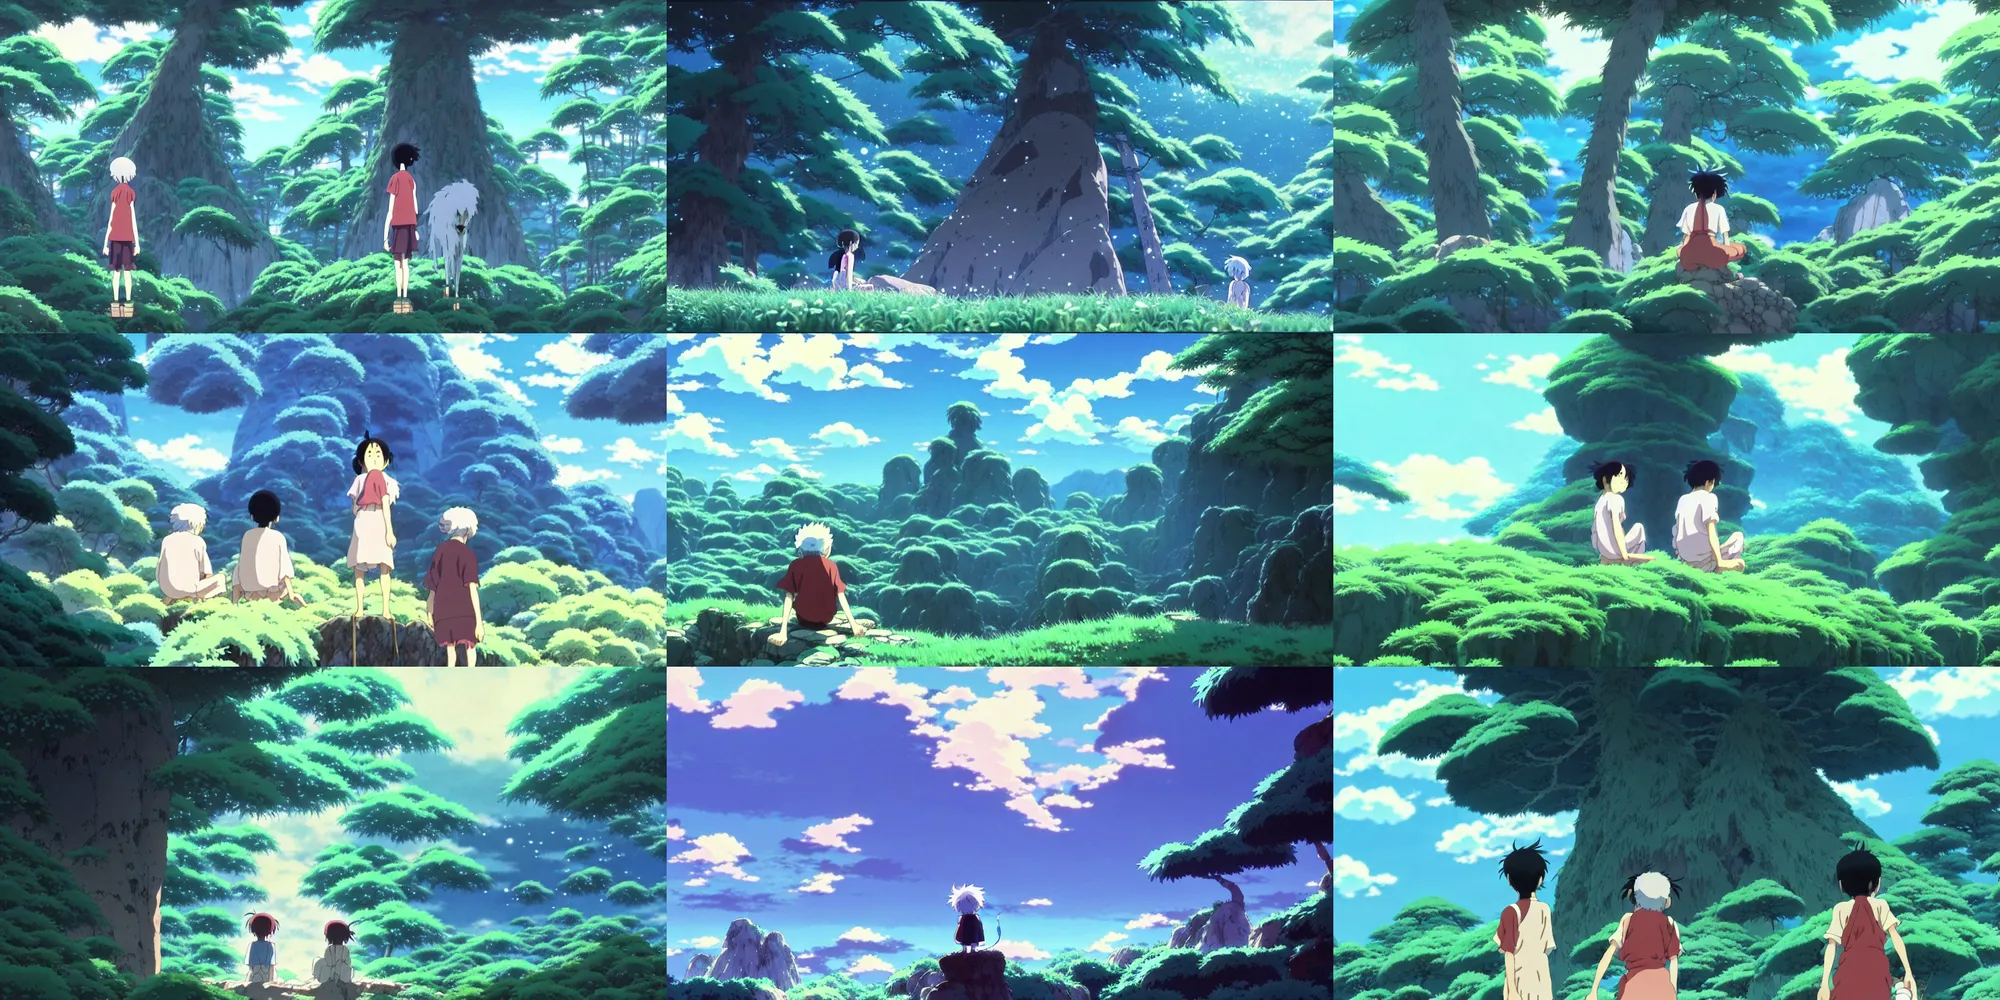 Prompt: a storybook illustration by Studio Ghibli, magical realism, an anime grandpa on an action adventure the otherworldly spirit world, painting by kazuo oga in the anime film, screenshot from the anime film Princess Mononoke by Makoto Shinkai